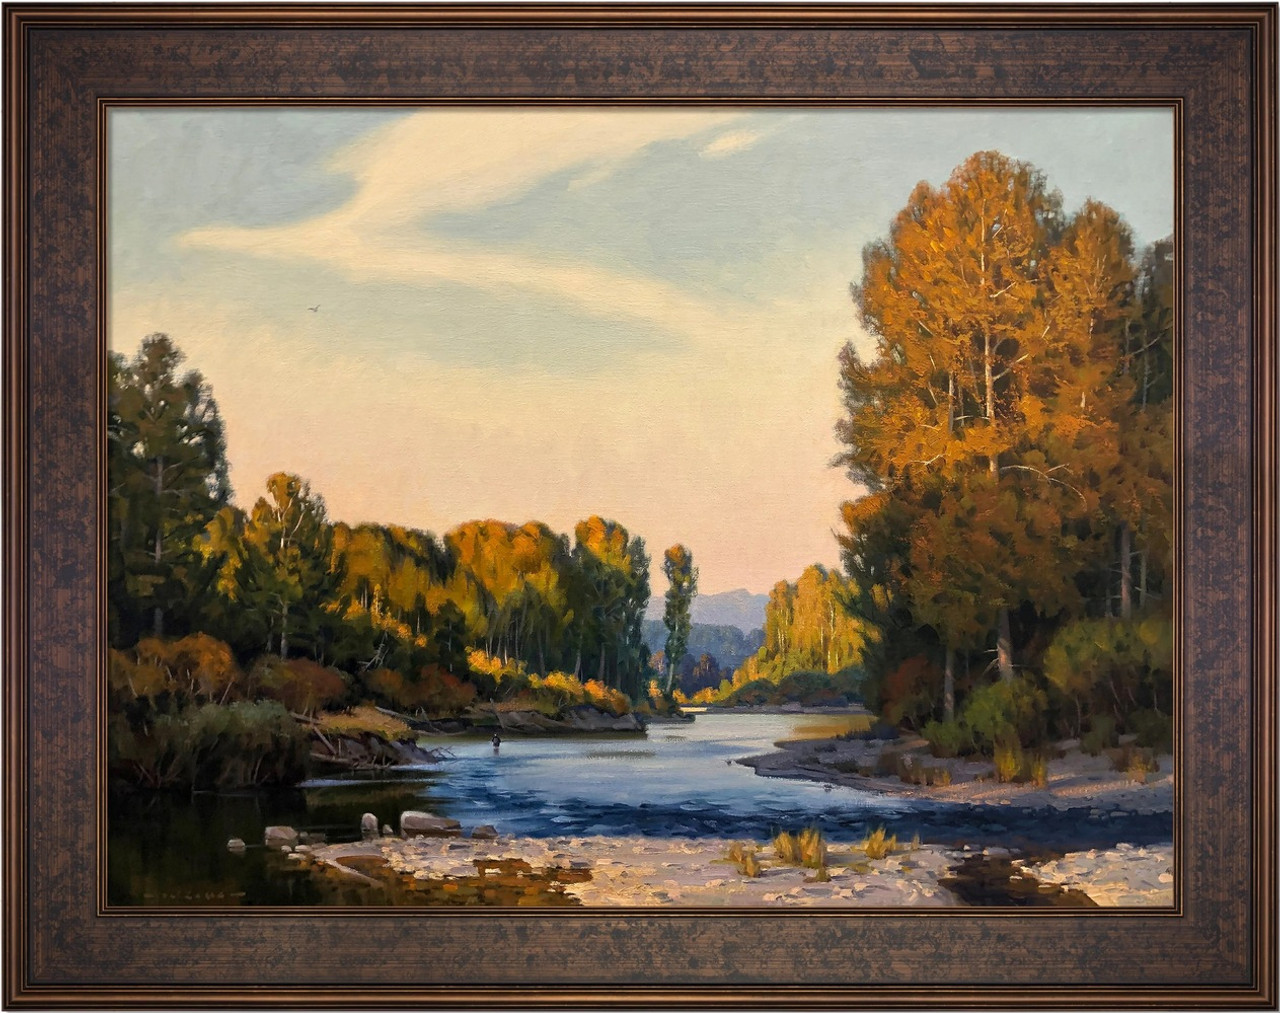 Autumn Evening Snoqualmie River Framed Original Oil Painting on Canvas by Jim Lamb